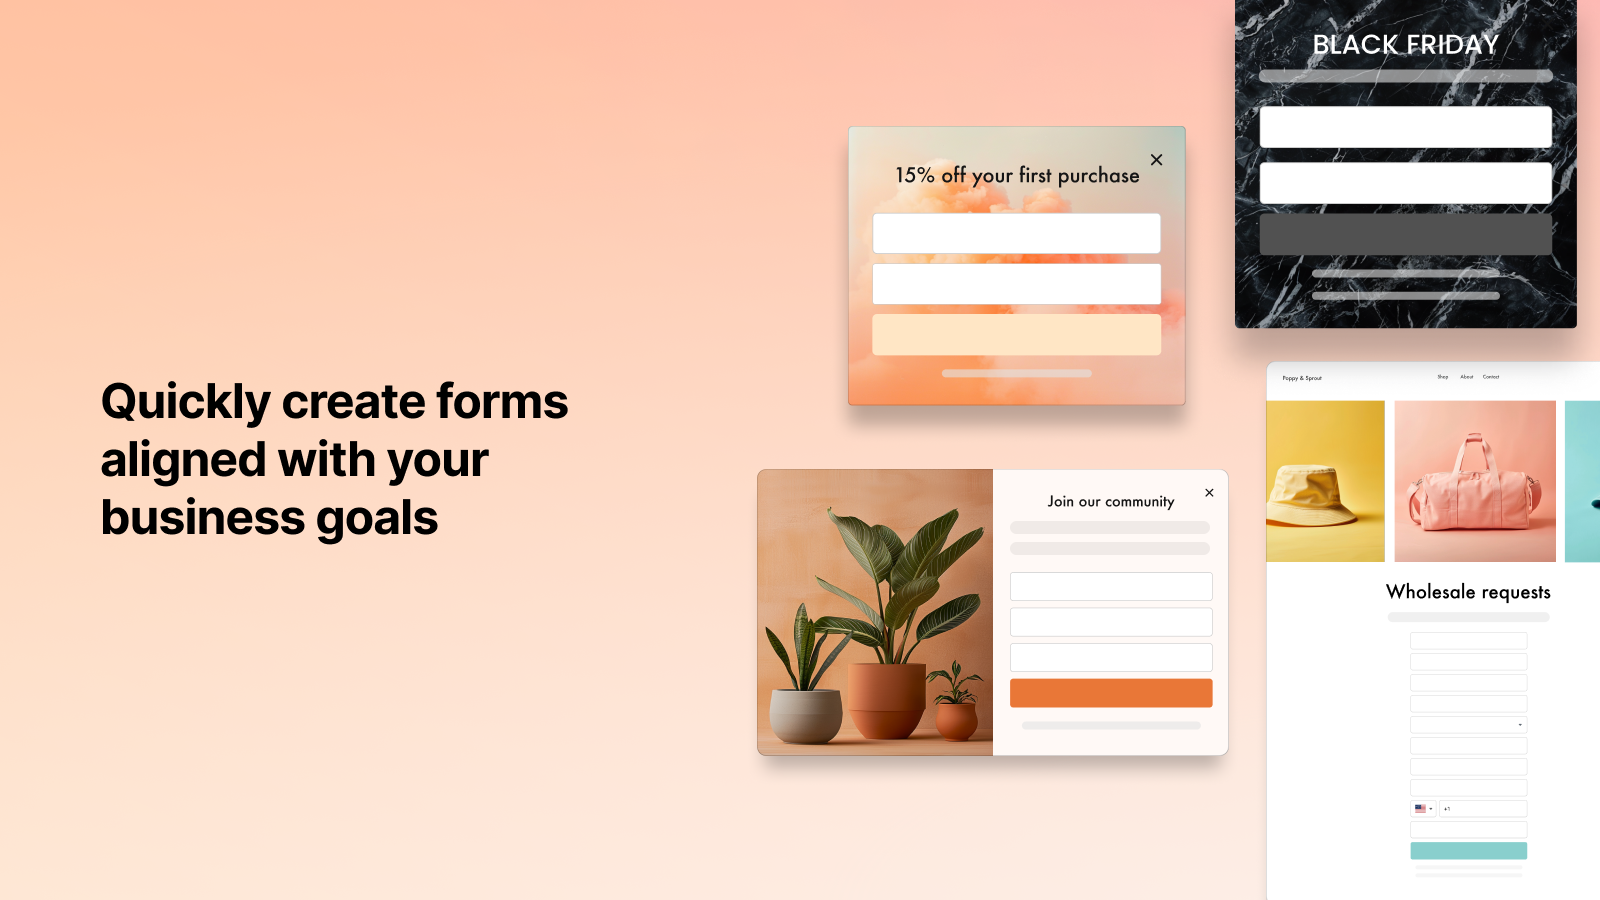 Quickly create forms aligned with your business goals